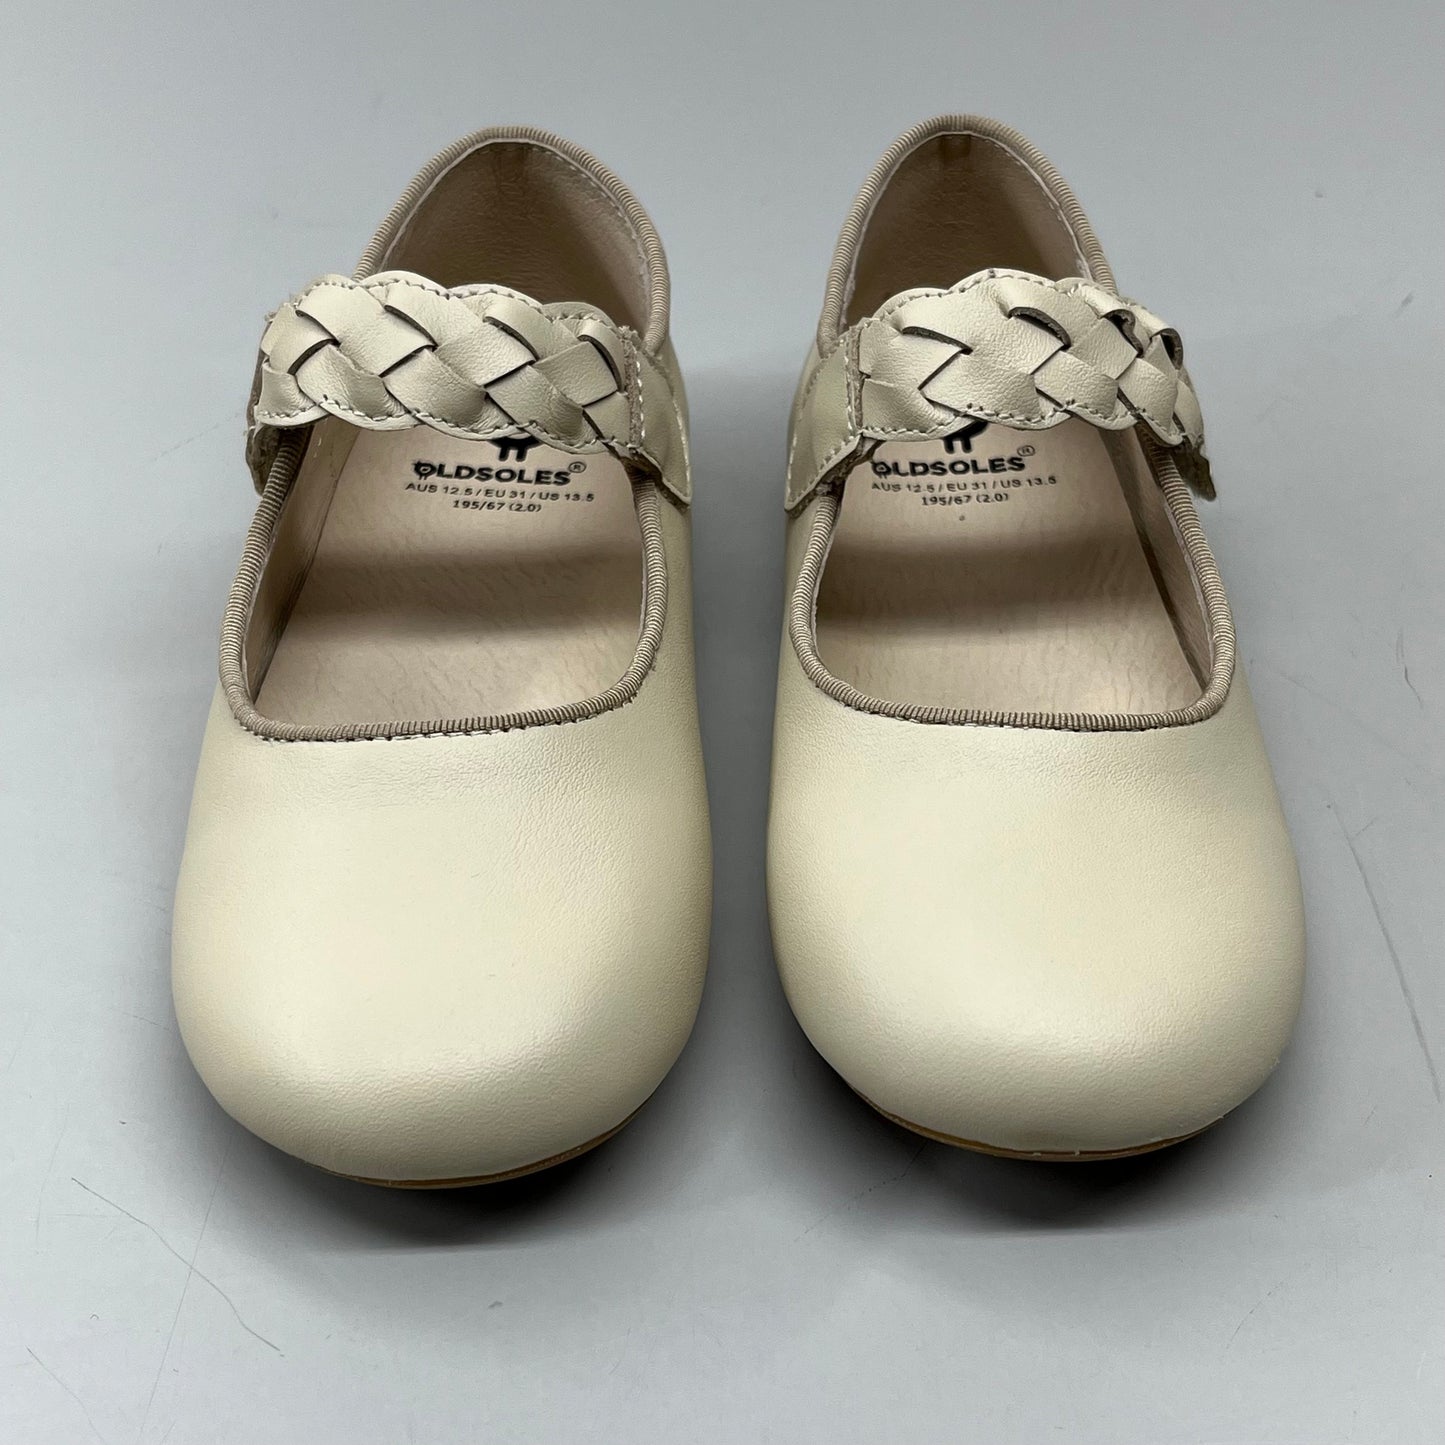 OLD SOLES Lady Plat Braided Strap Leather Shoe Kid’s Sz 25 US 9 Cream #817